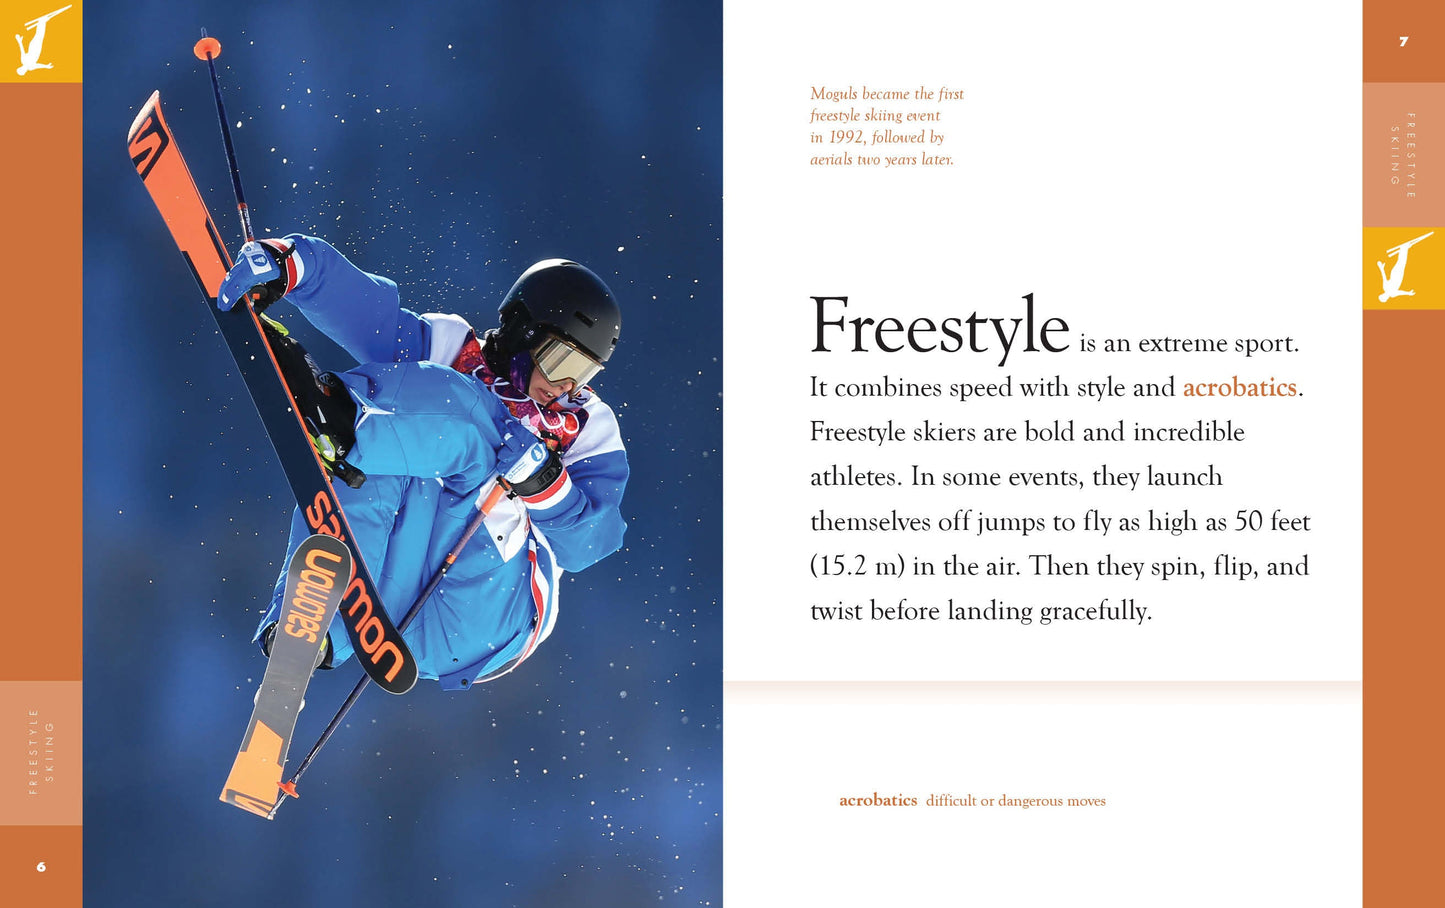 Amazing Winter Olympics: Freestyle Skiing by The Creative Company Shop